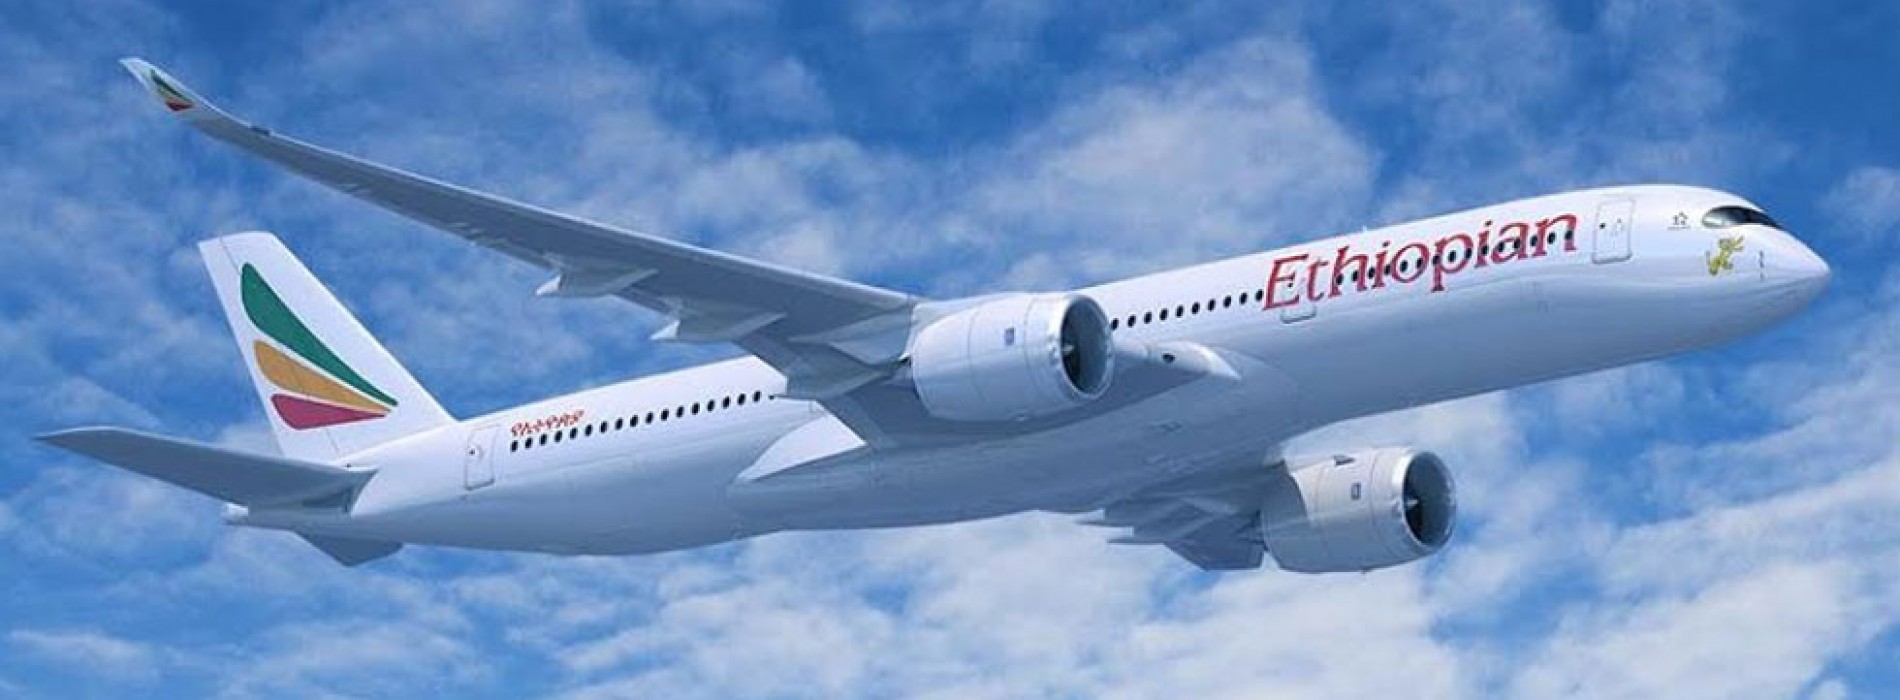 Ethiopian to start services to Windhoek, Namibia